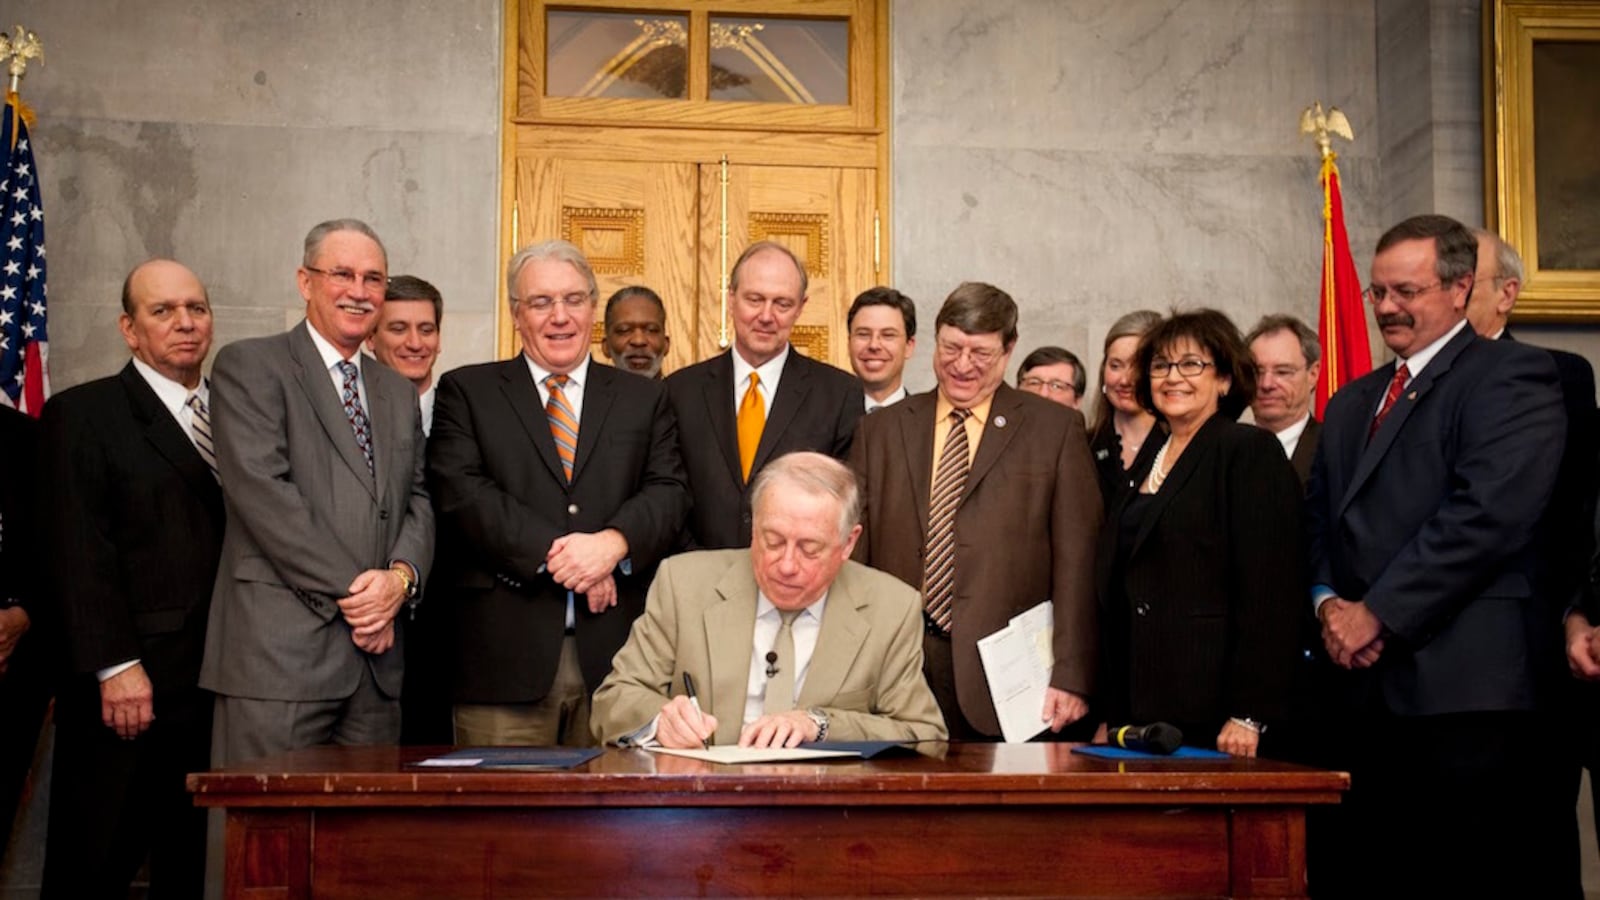 Gov. Phil Bredesen poses with state legislative leaders on Jan. 26, 2010, for a ceremonial signing of the First to the Top Act. The law was passed as part of Tennessee's competitive application for the U.S. Department of Education's Race to the Top grant program under President Barack Obama.